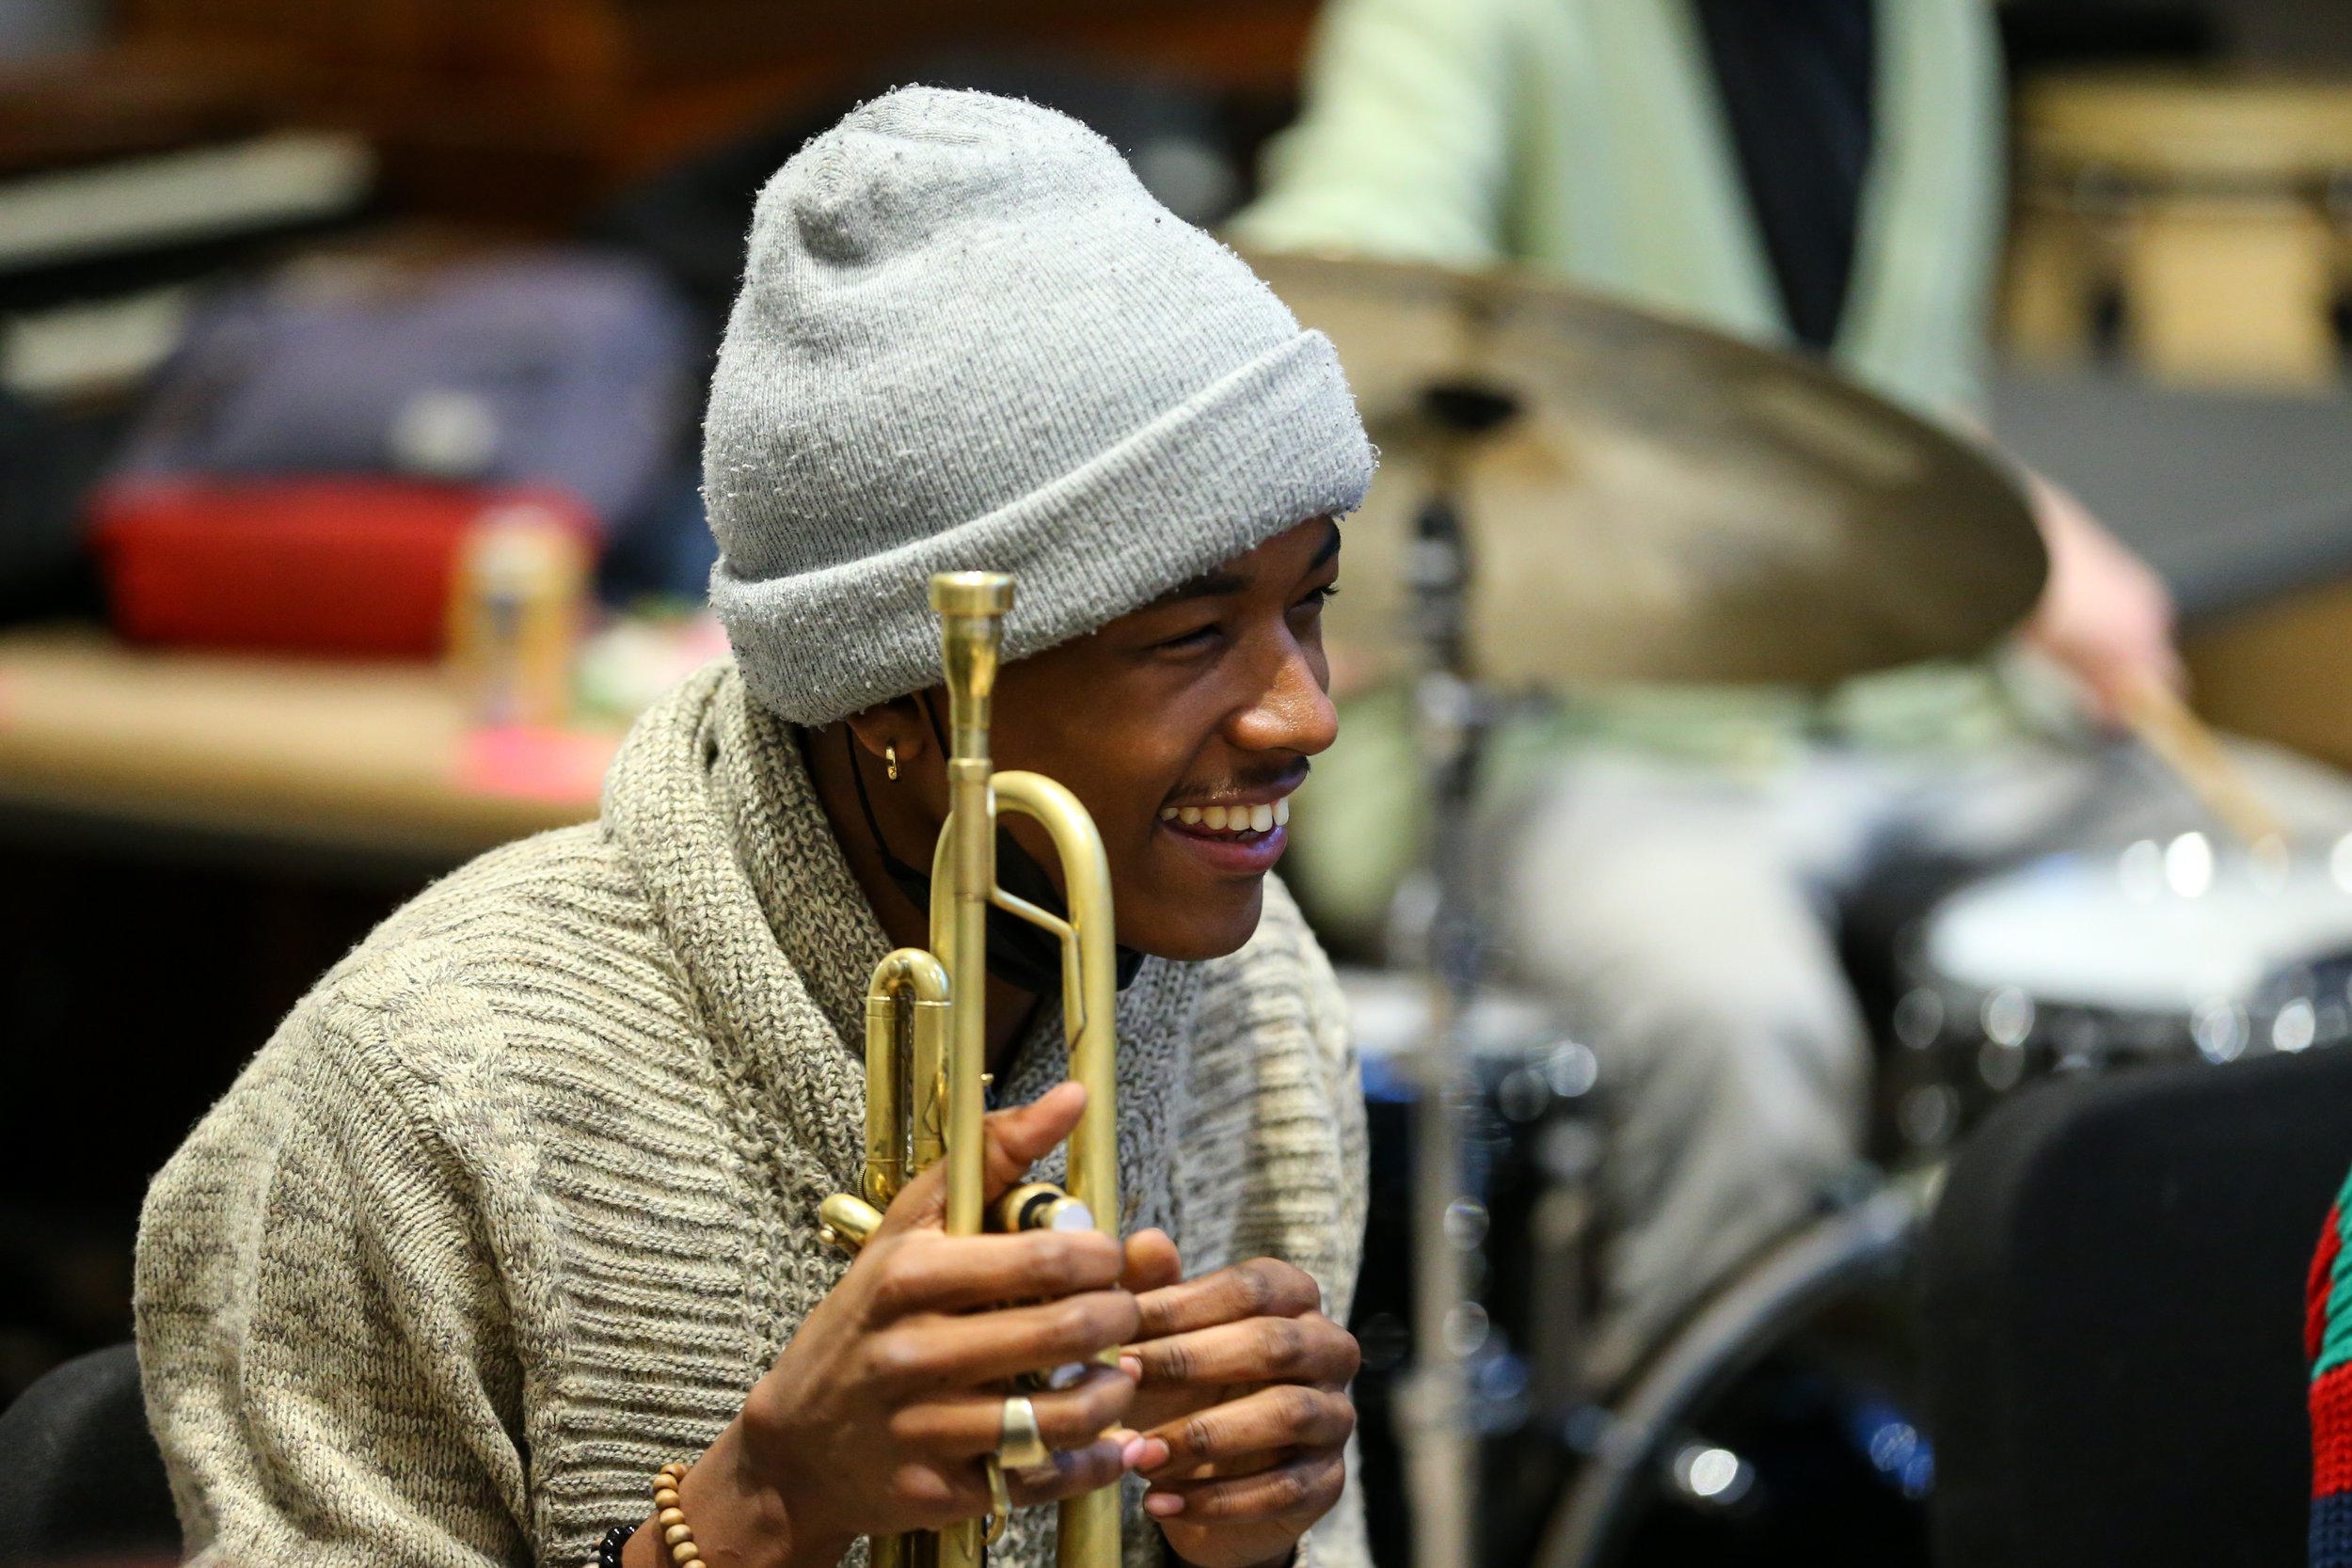 A student with a trumpet laughs during an ensemble rehearsal in a Woolworth Center classroom.